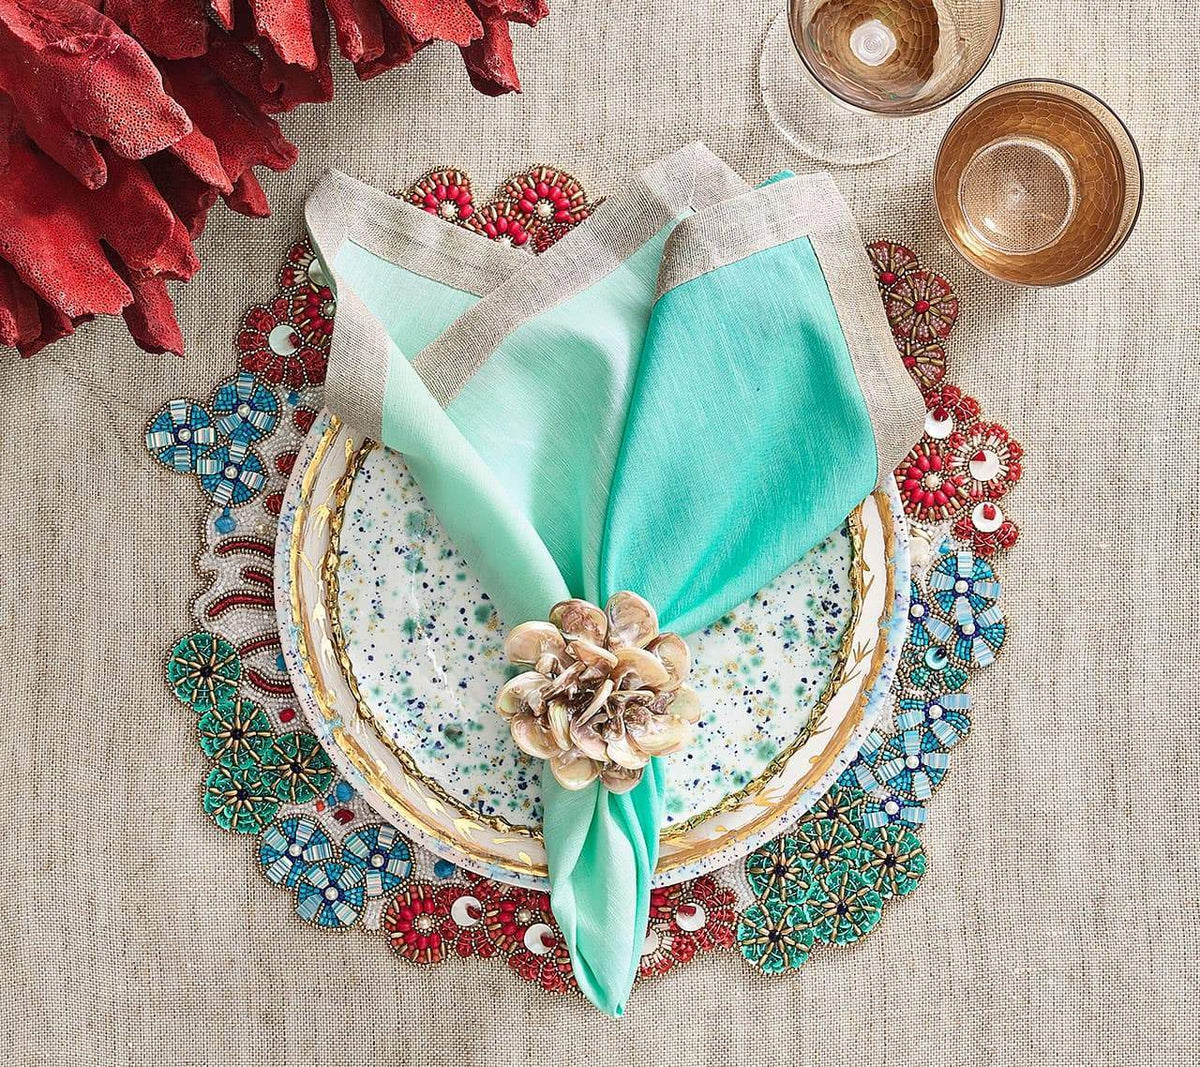 Cozumel Placemat in Turquoise, Coral, & Gold, Set of 2